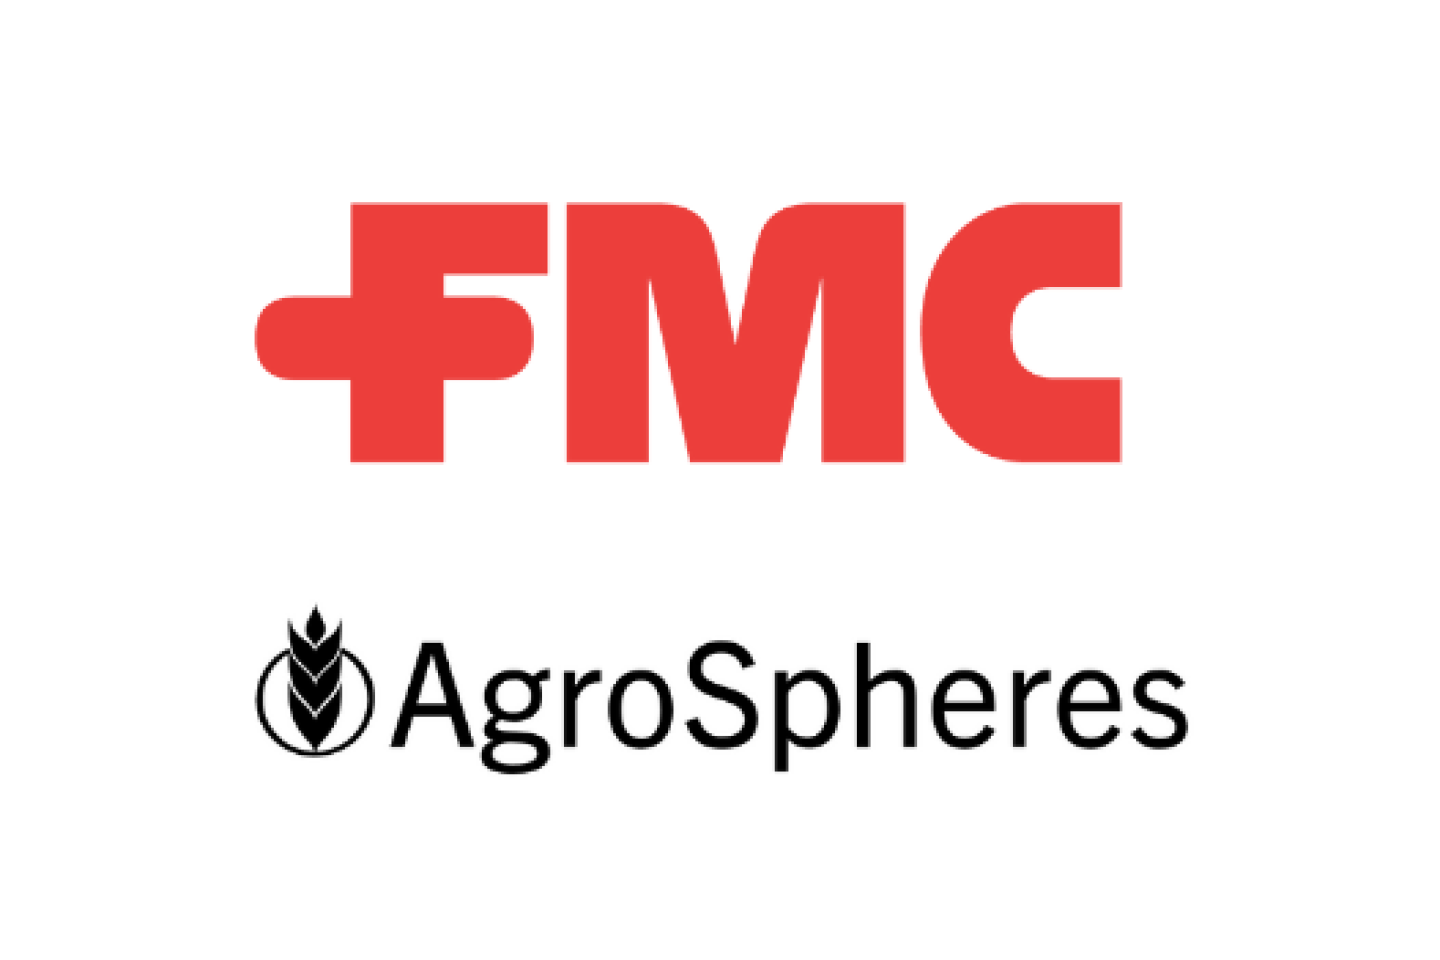 FMC and AgroSpheres logo